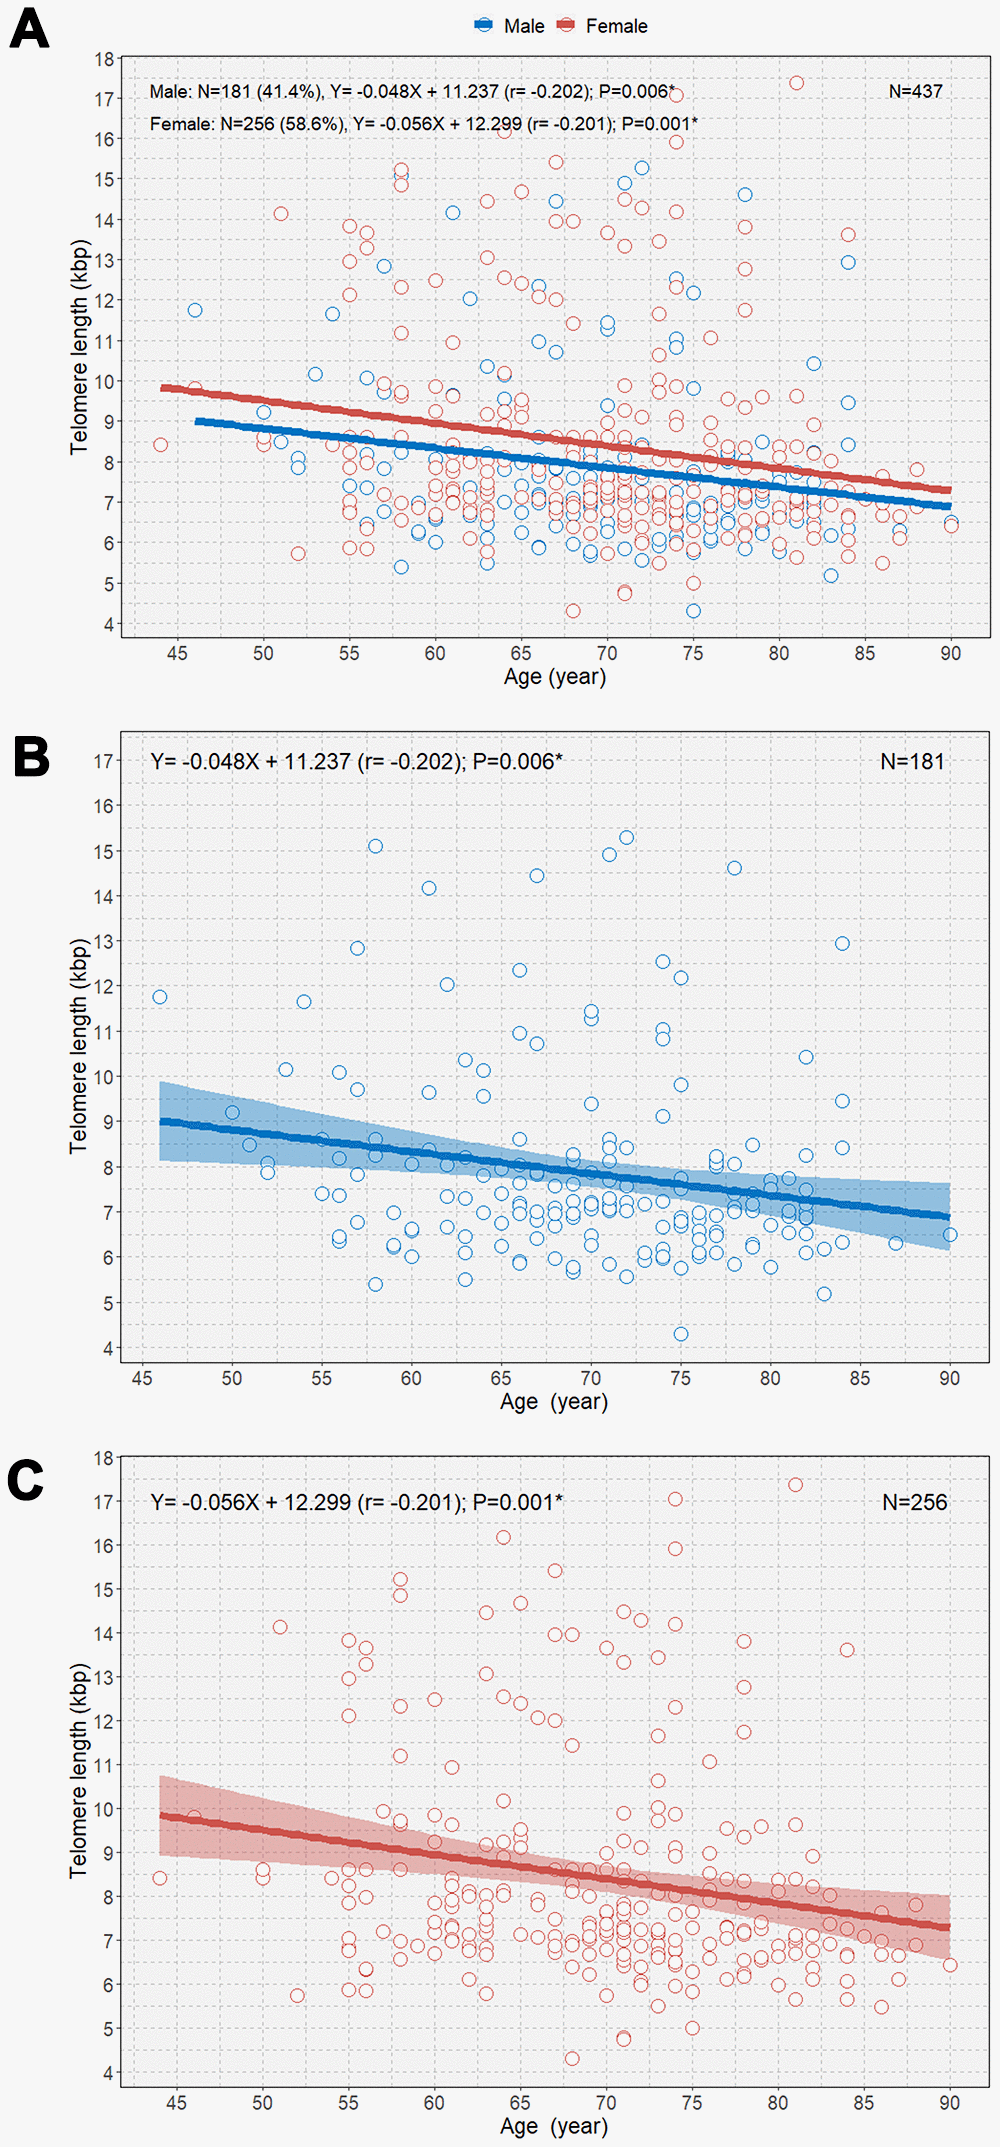 Scatterplot with linear regression lines with 95% confidence intervals showing the associations between age and telomere length according to sex (A), age and telomere length in men (B); and age and telomere length in women (C). *P